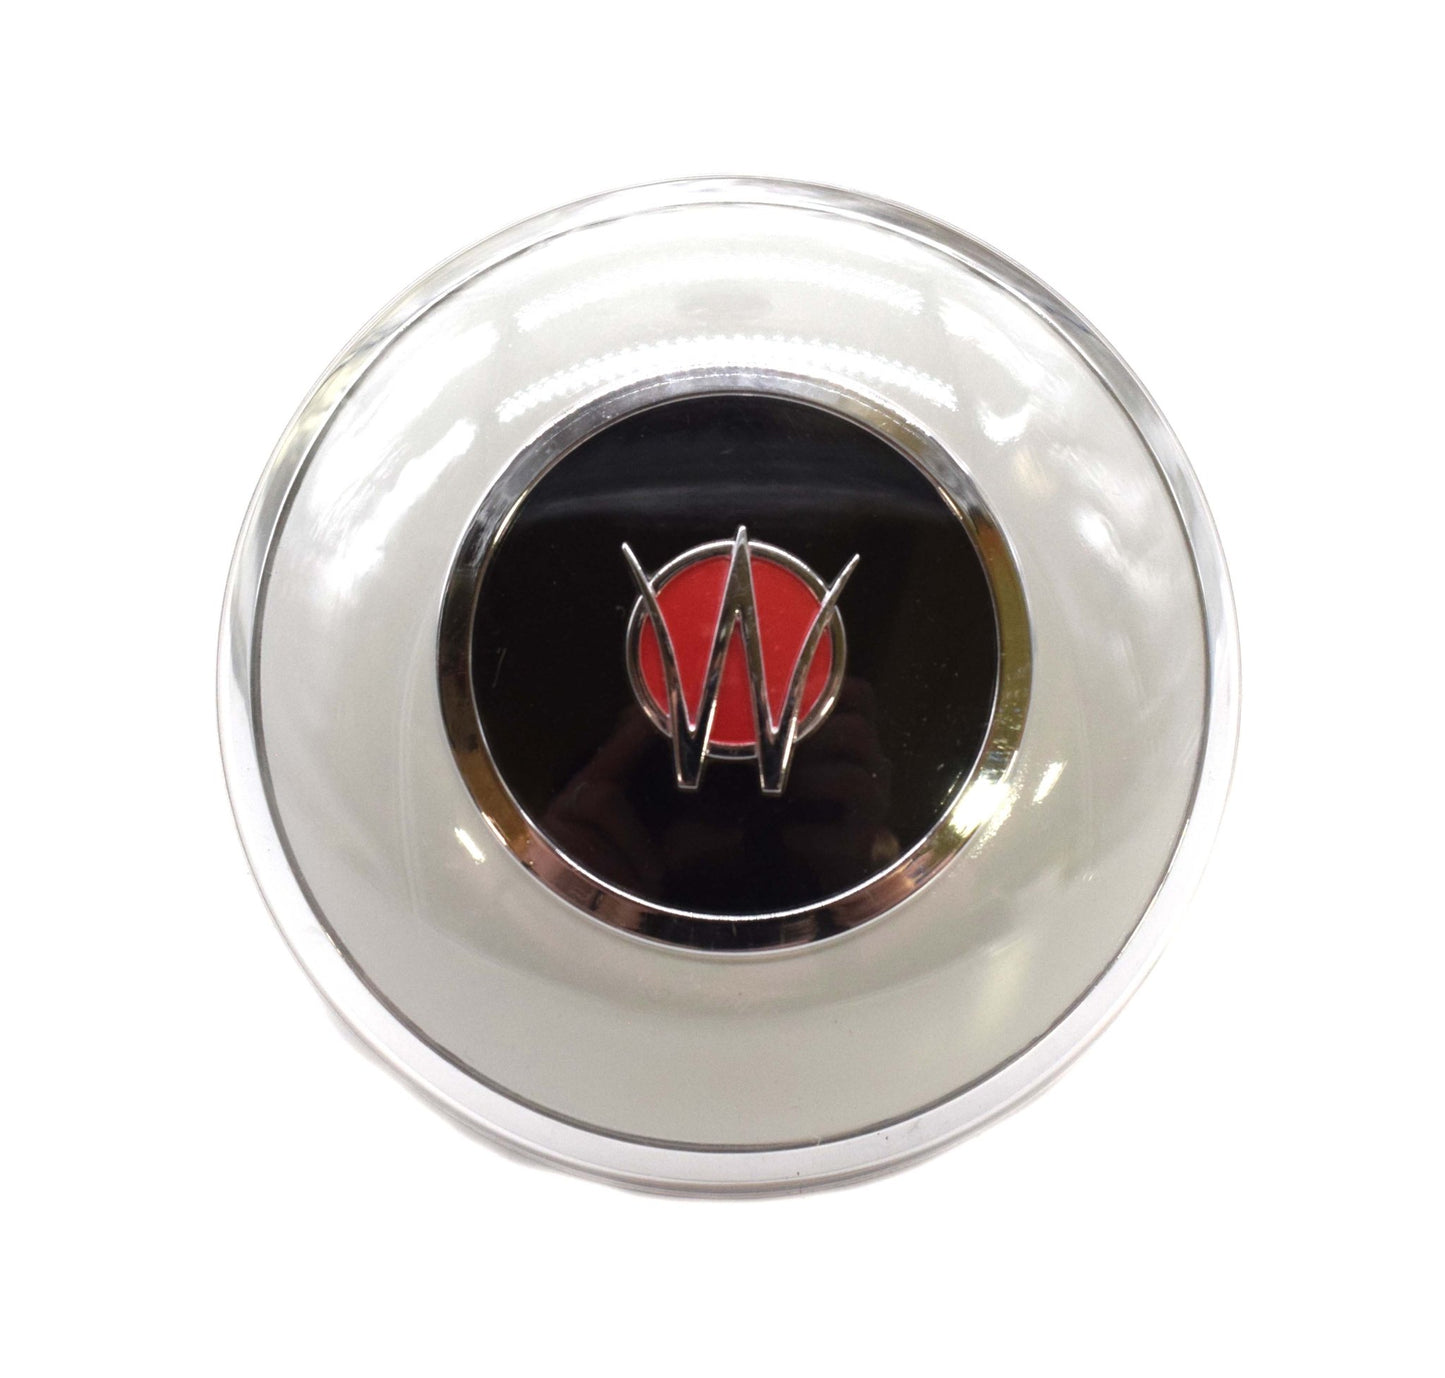 Horn Button, Ivory, 1950-1963, Jeepster, Station Wagon, Pickup Truck - The JeepsterMan